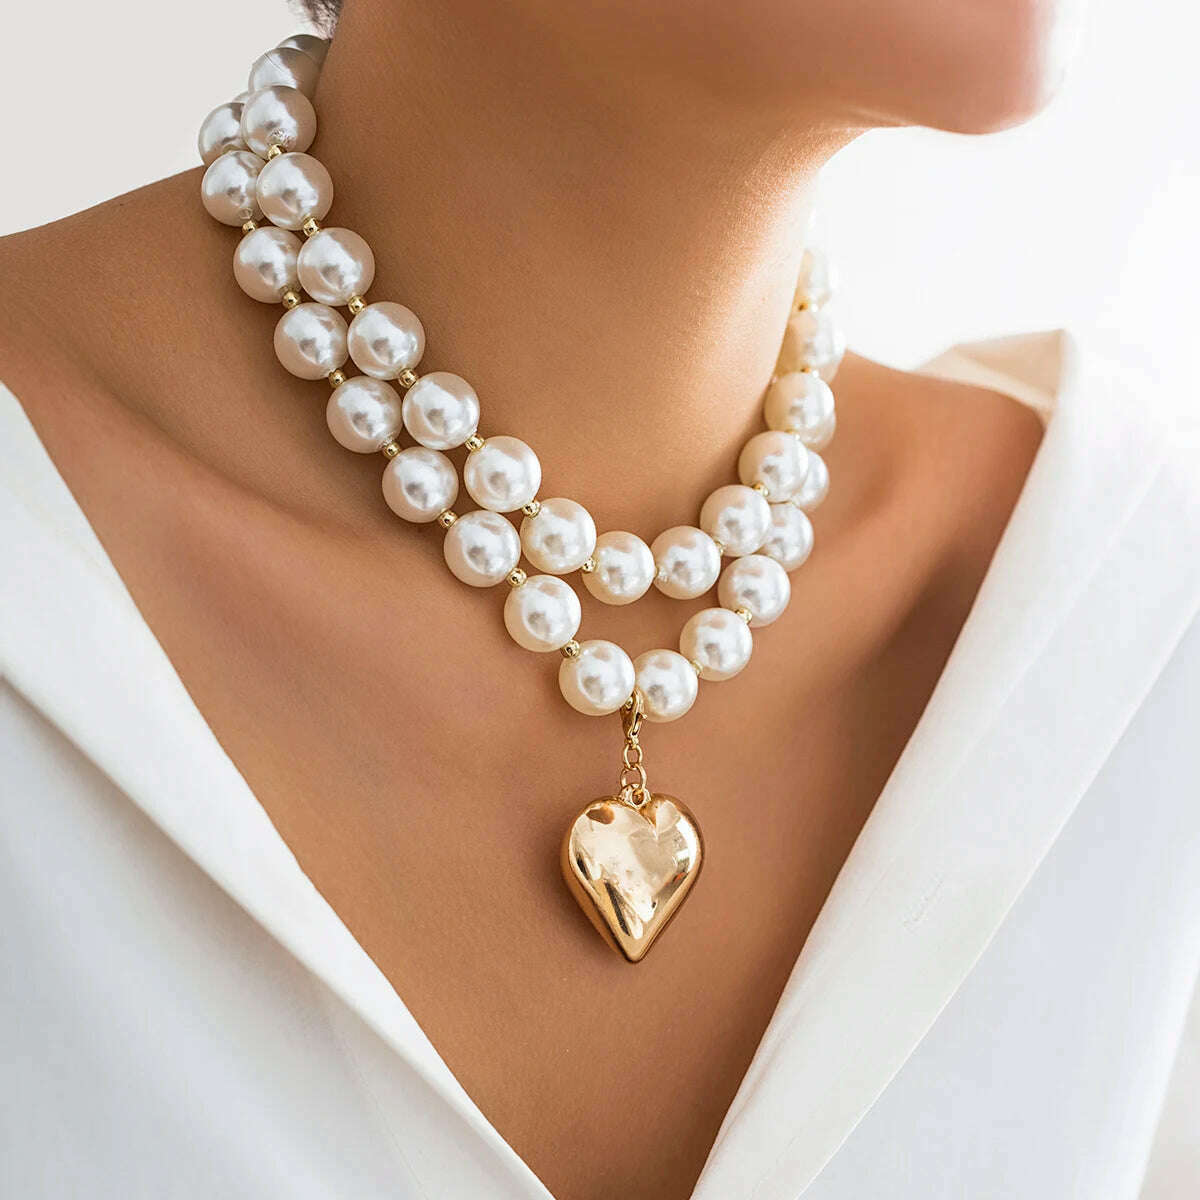 KIMLUD, Big Imitation Pearl Beads Layered Chains with Heart Pendant Necklace for Women Trendy Wedding Ladies Accessories on Neck Fashion, White, KIMLUD Women's Clothes